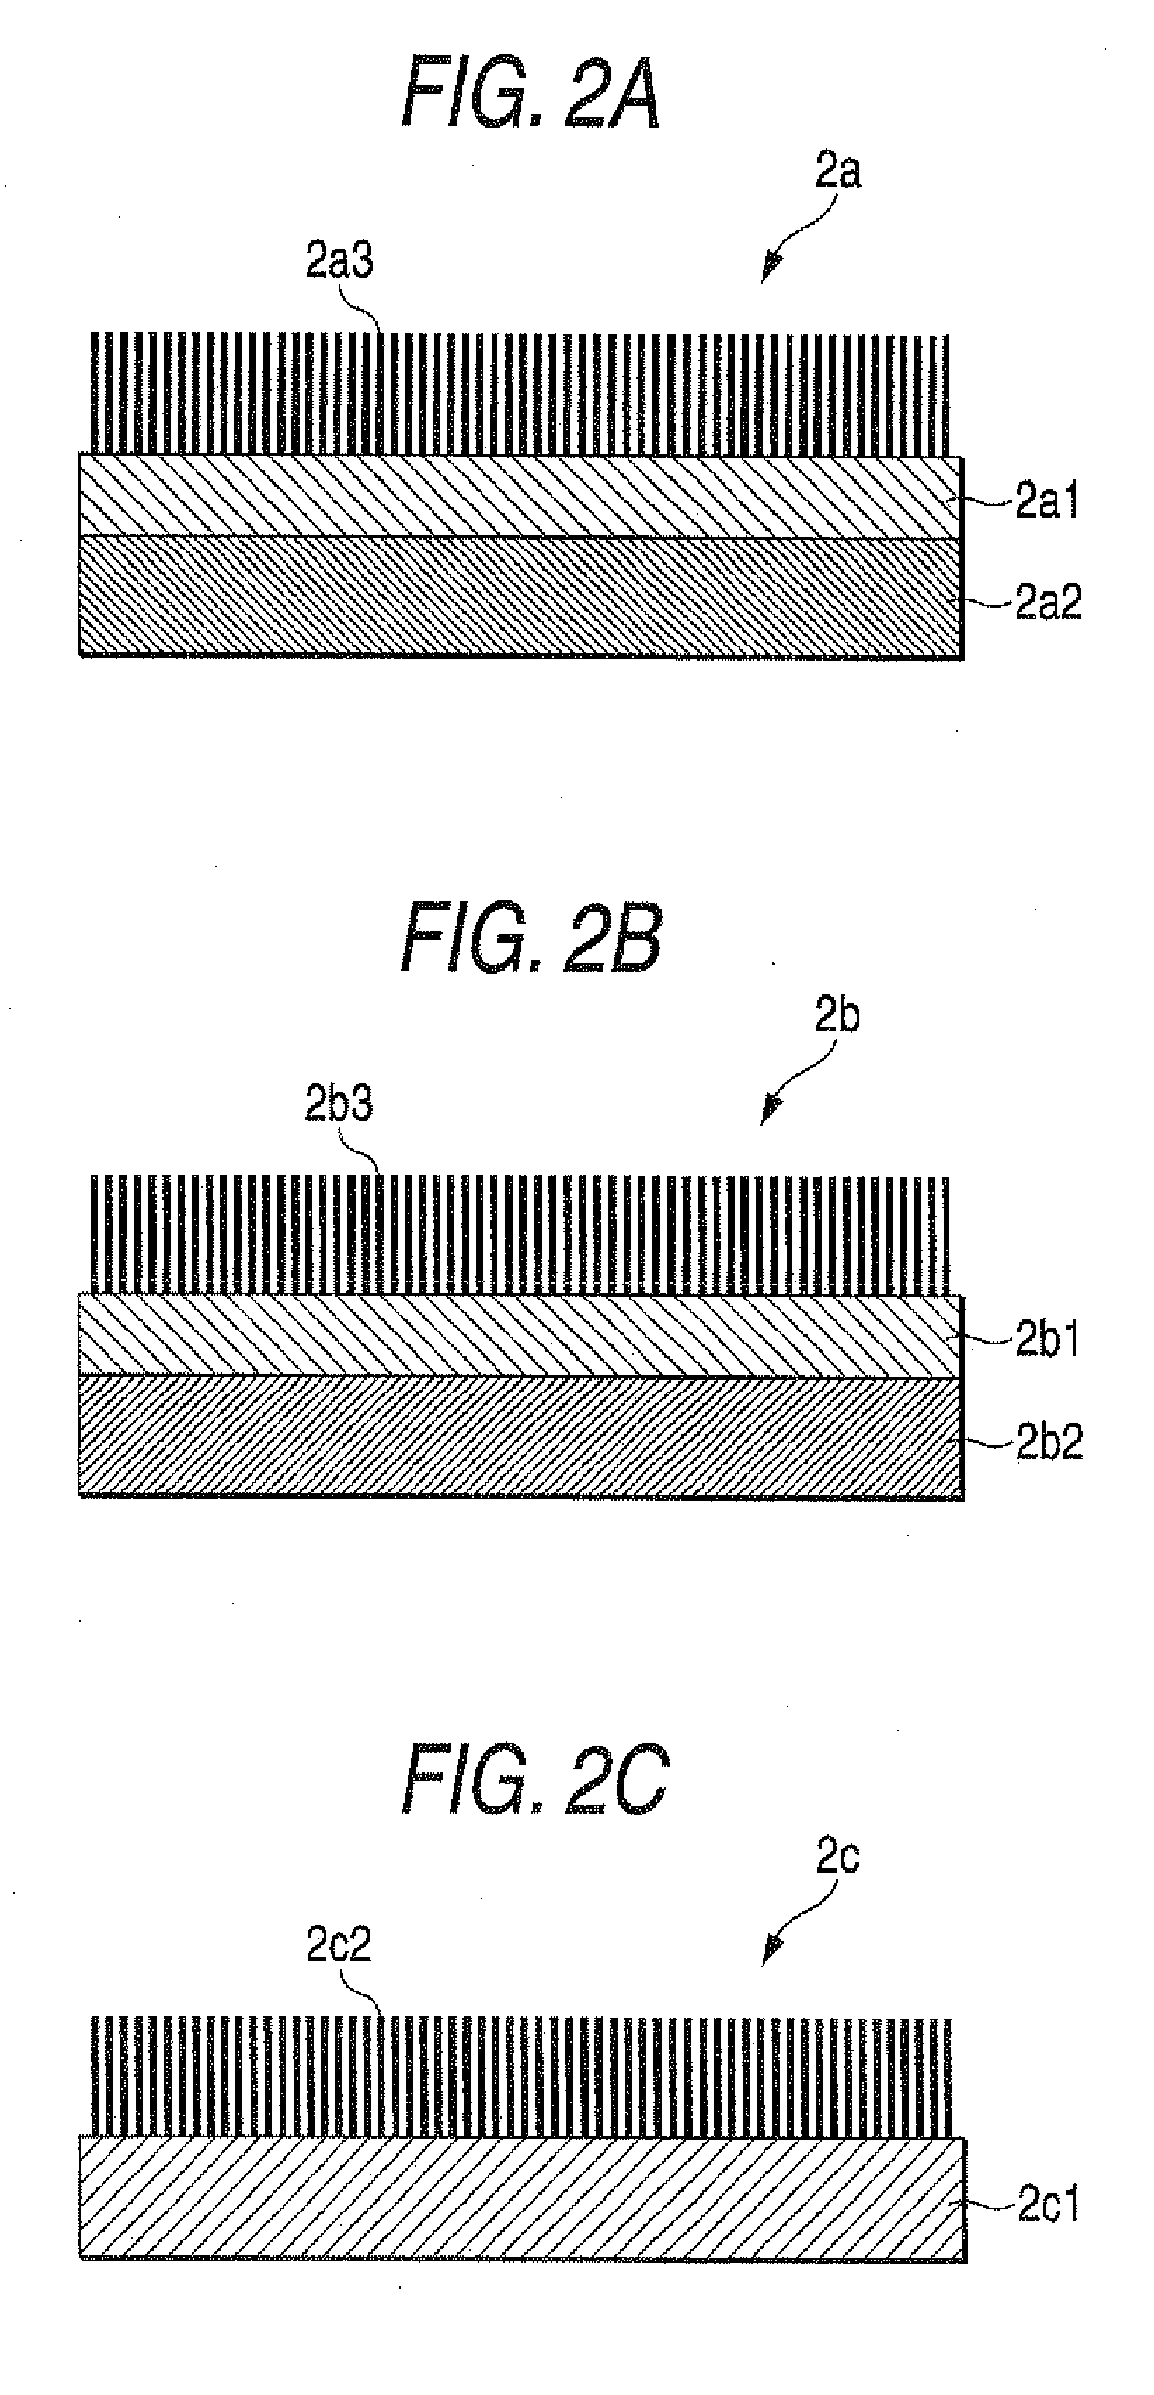 Article including sheet-like electromagnetic shielding structure